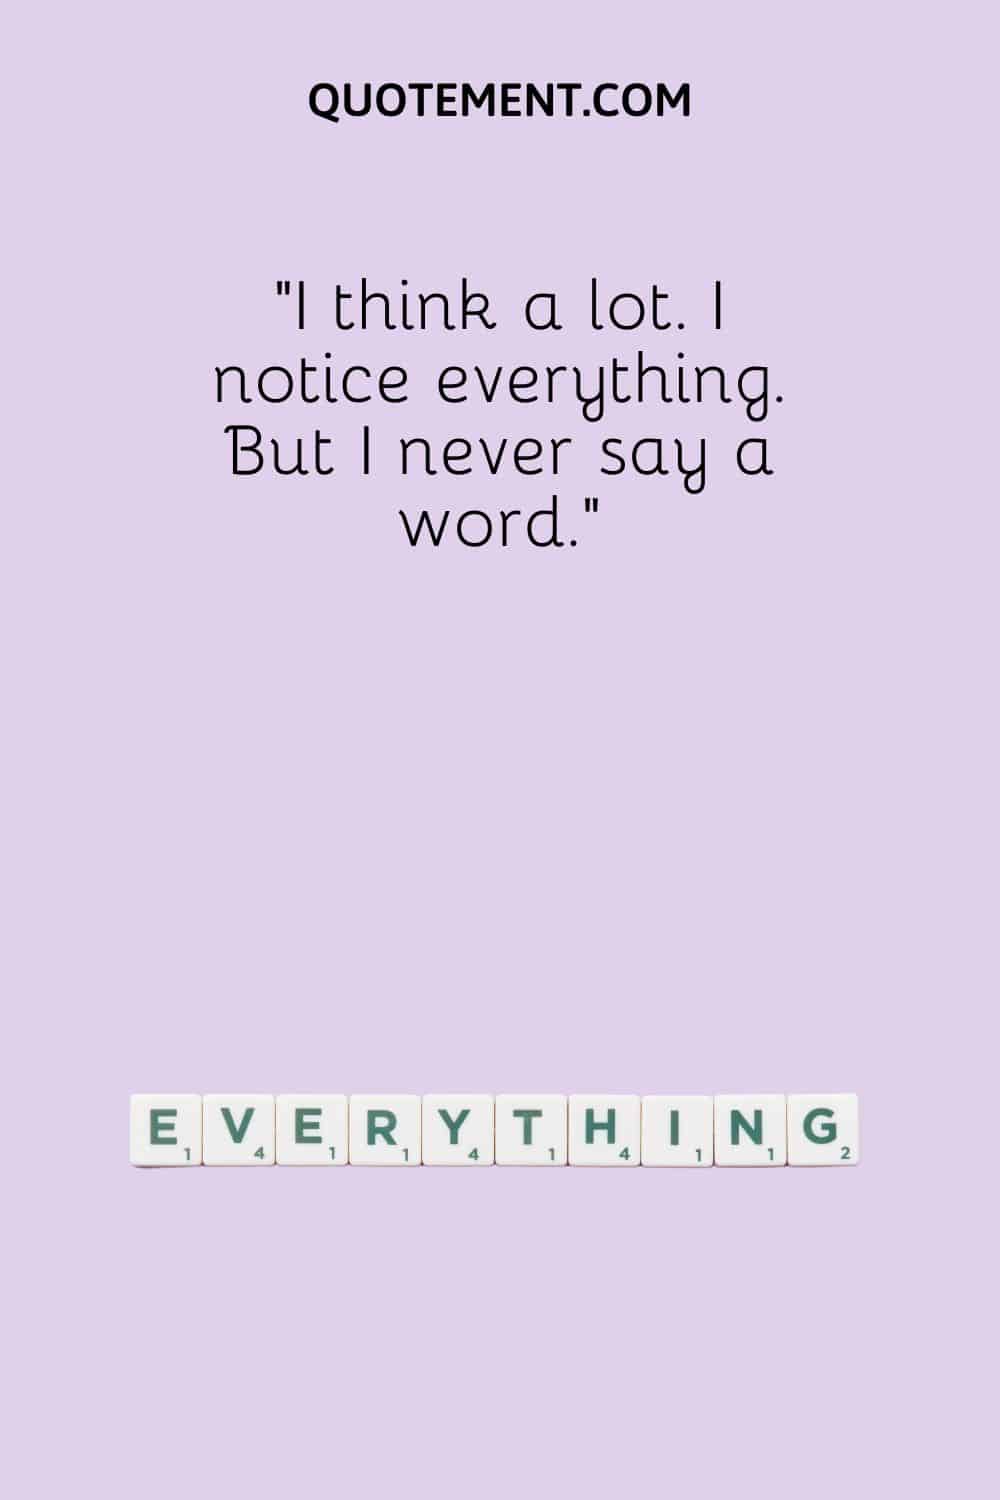 I think a lot. I notice everything. But I never say a word.